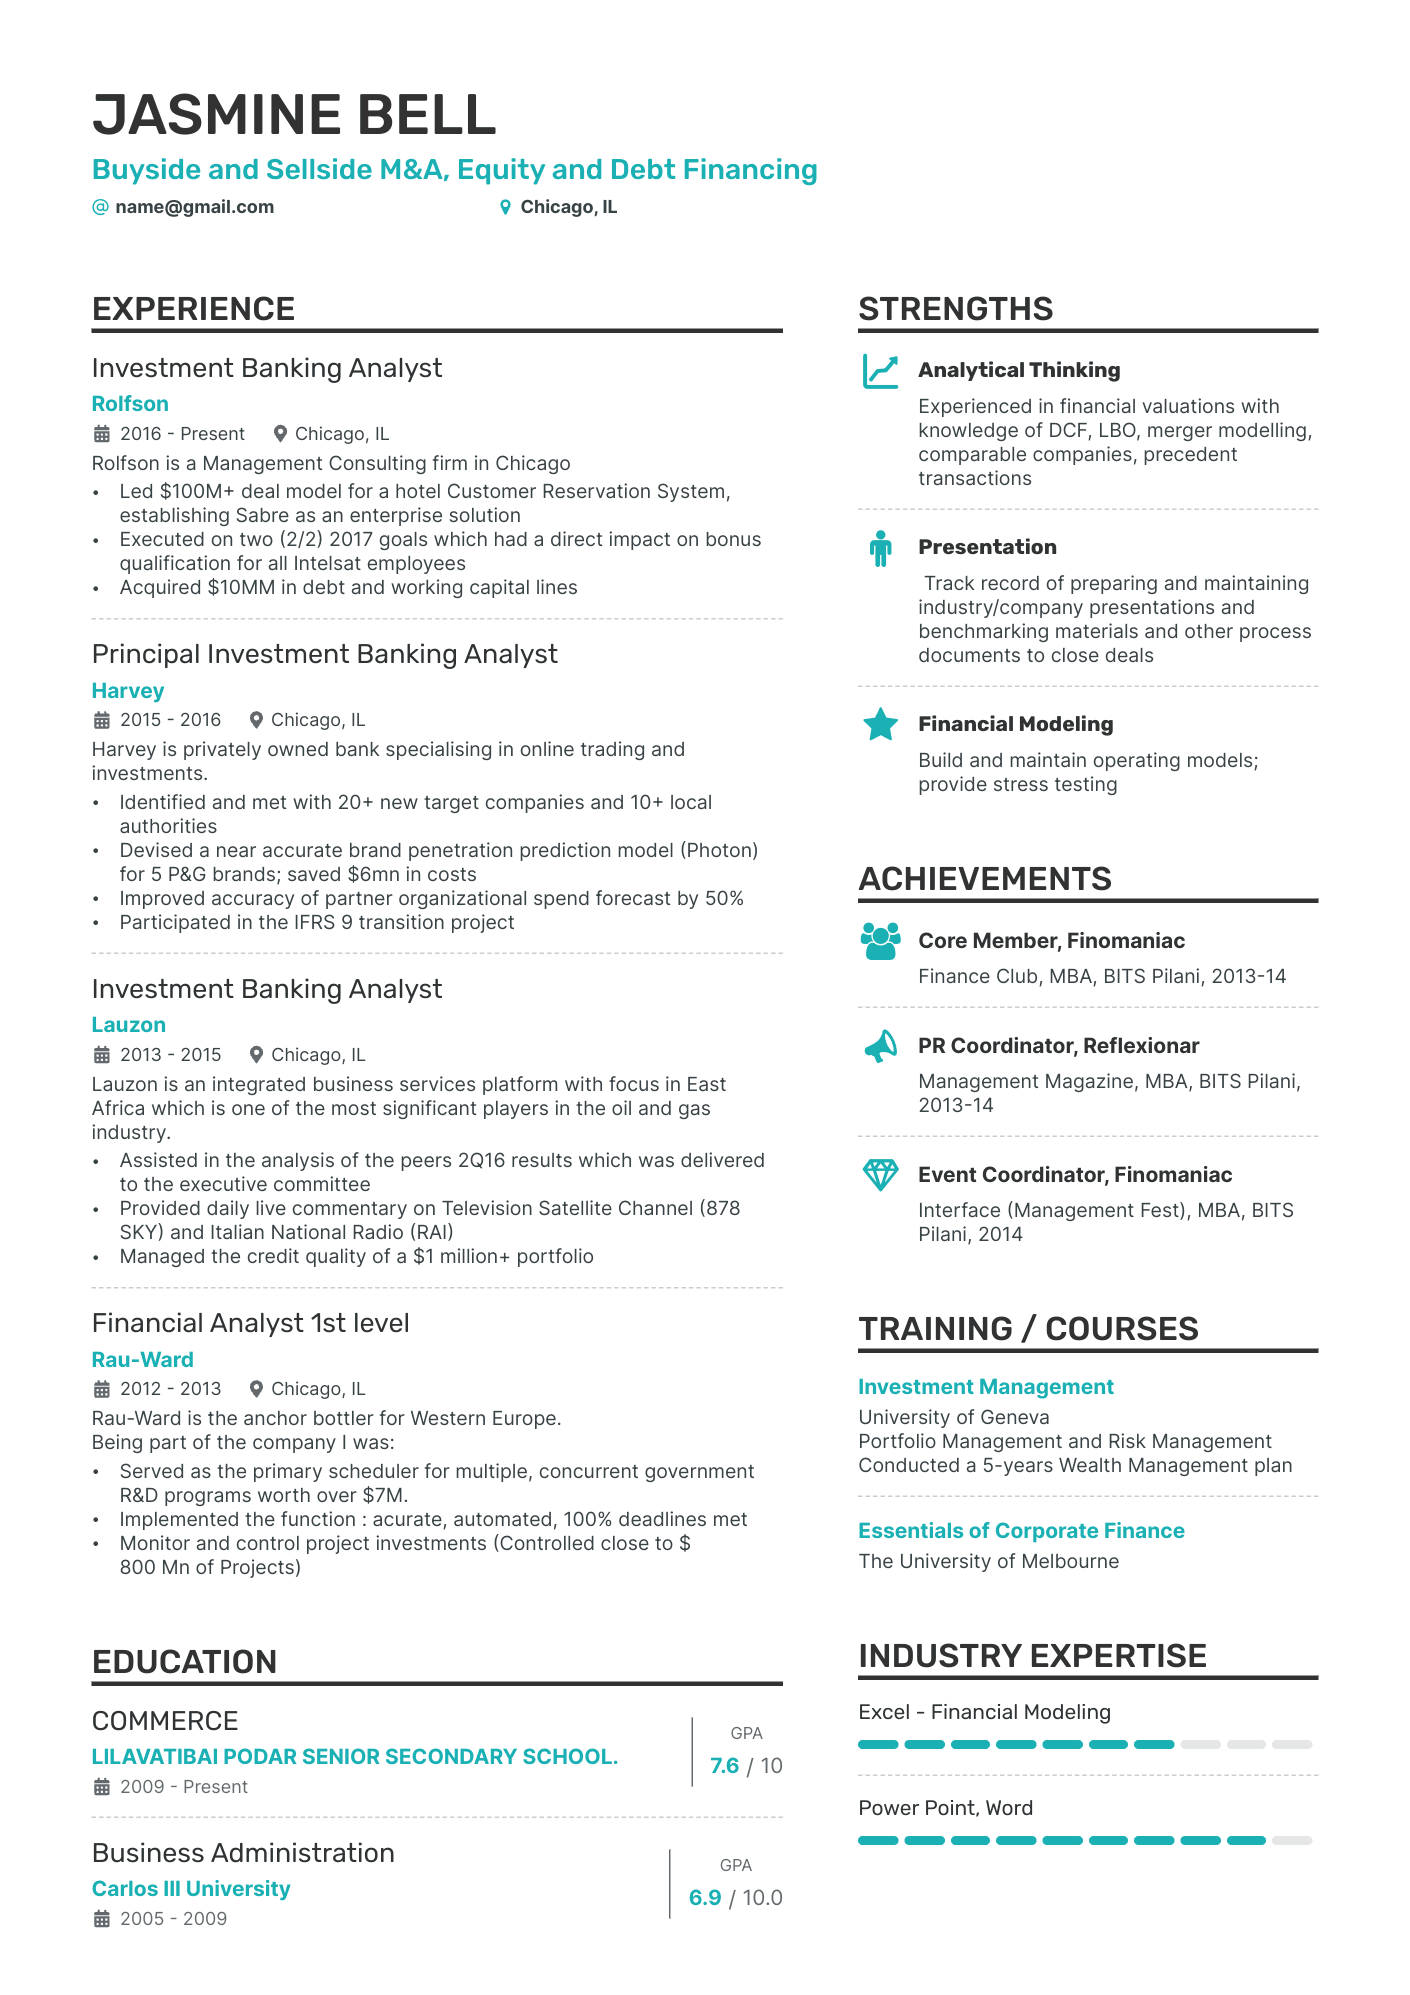 Investment Banking Analyst resume example